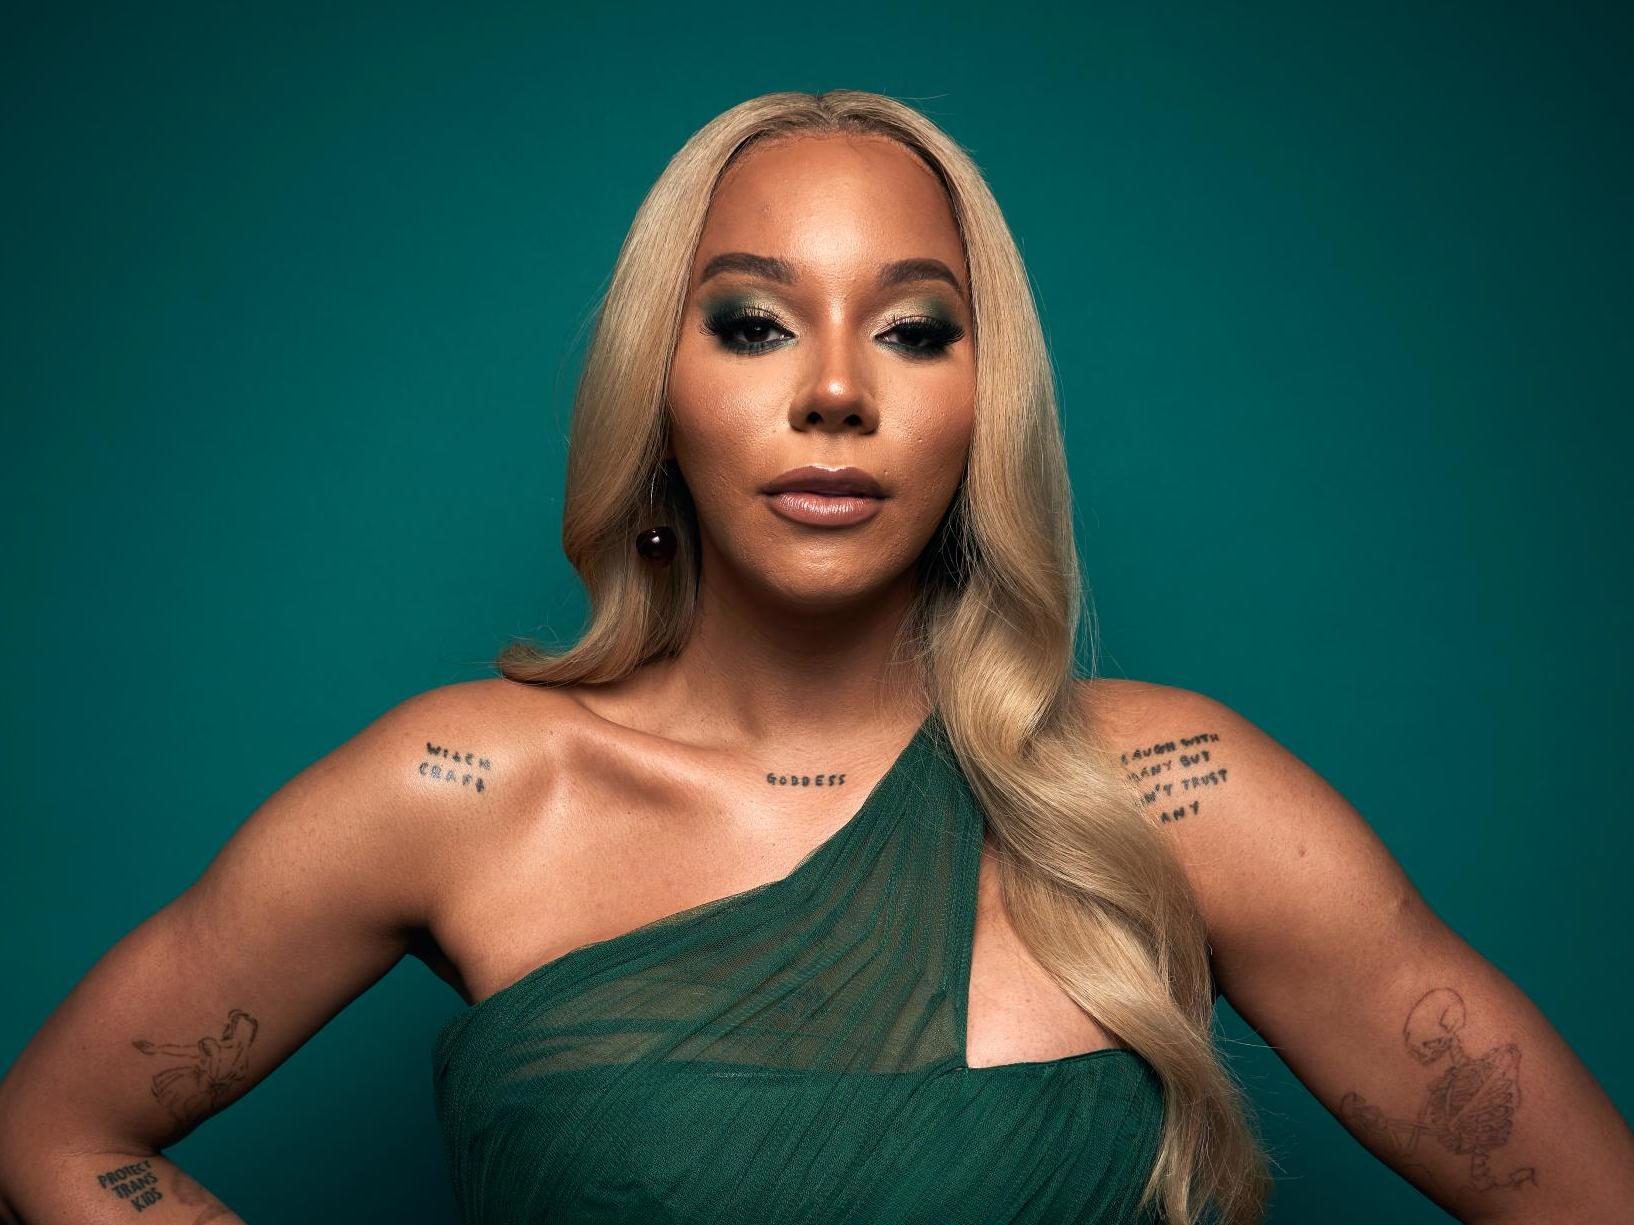 Munroe Bergdorf has spoken out against systemic racism